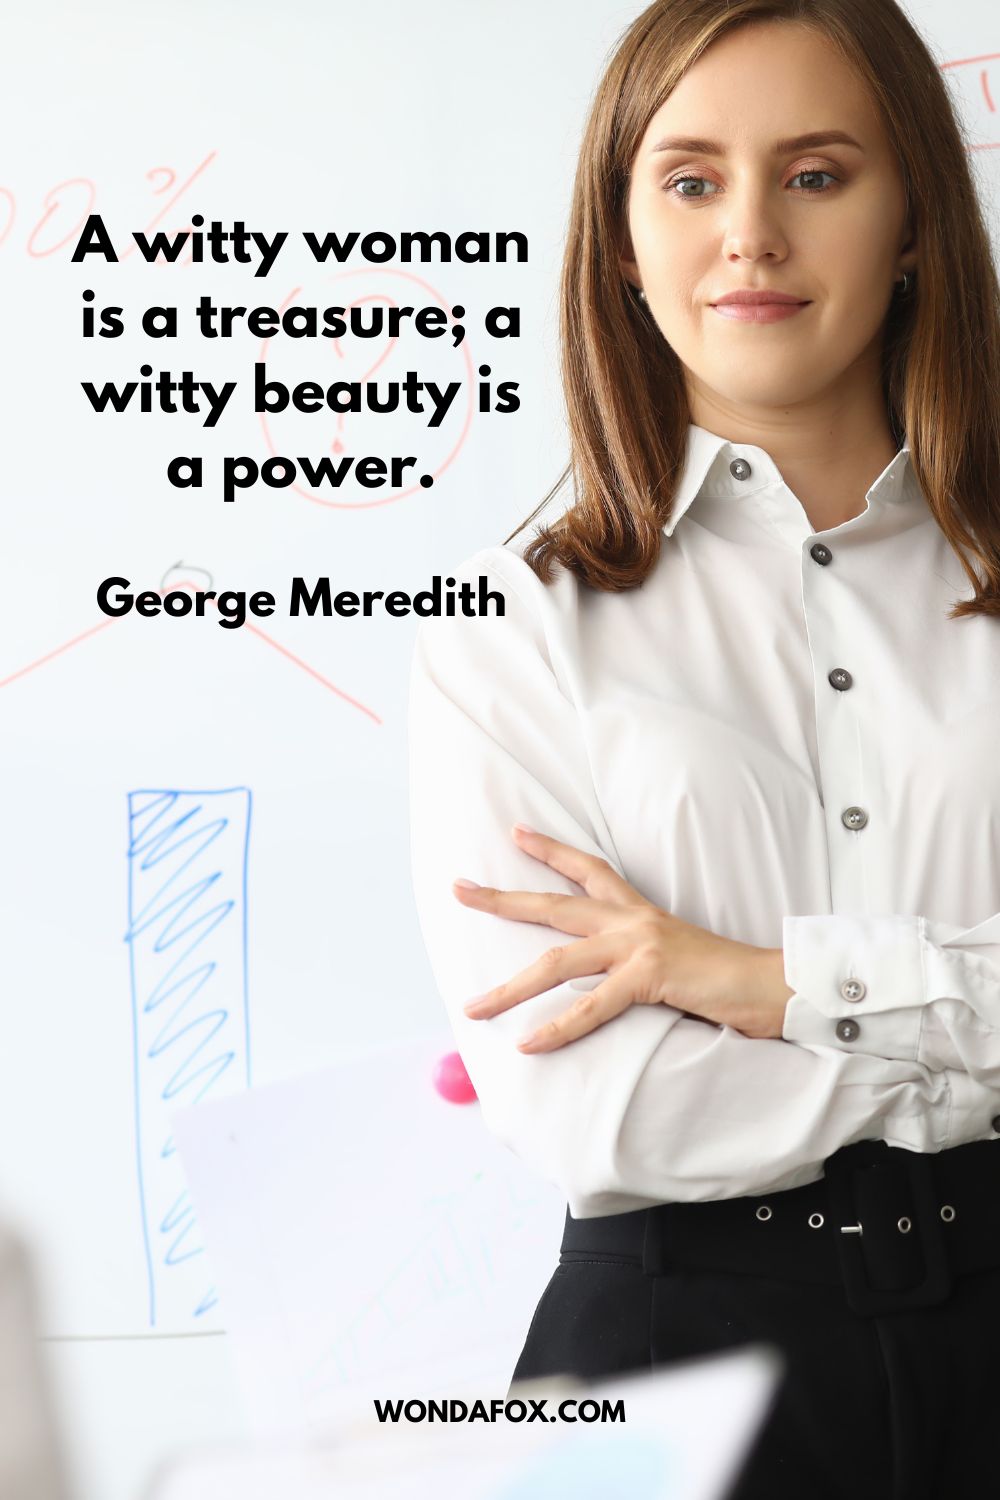 A witty woman is a treasure; a witty beauty is a power. George Meredith